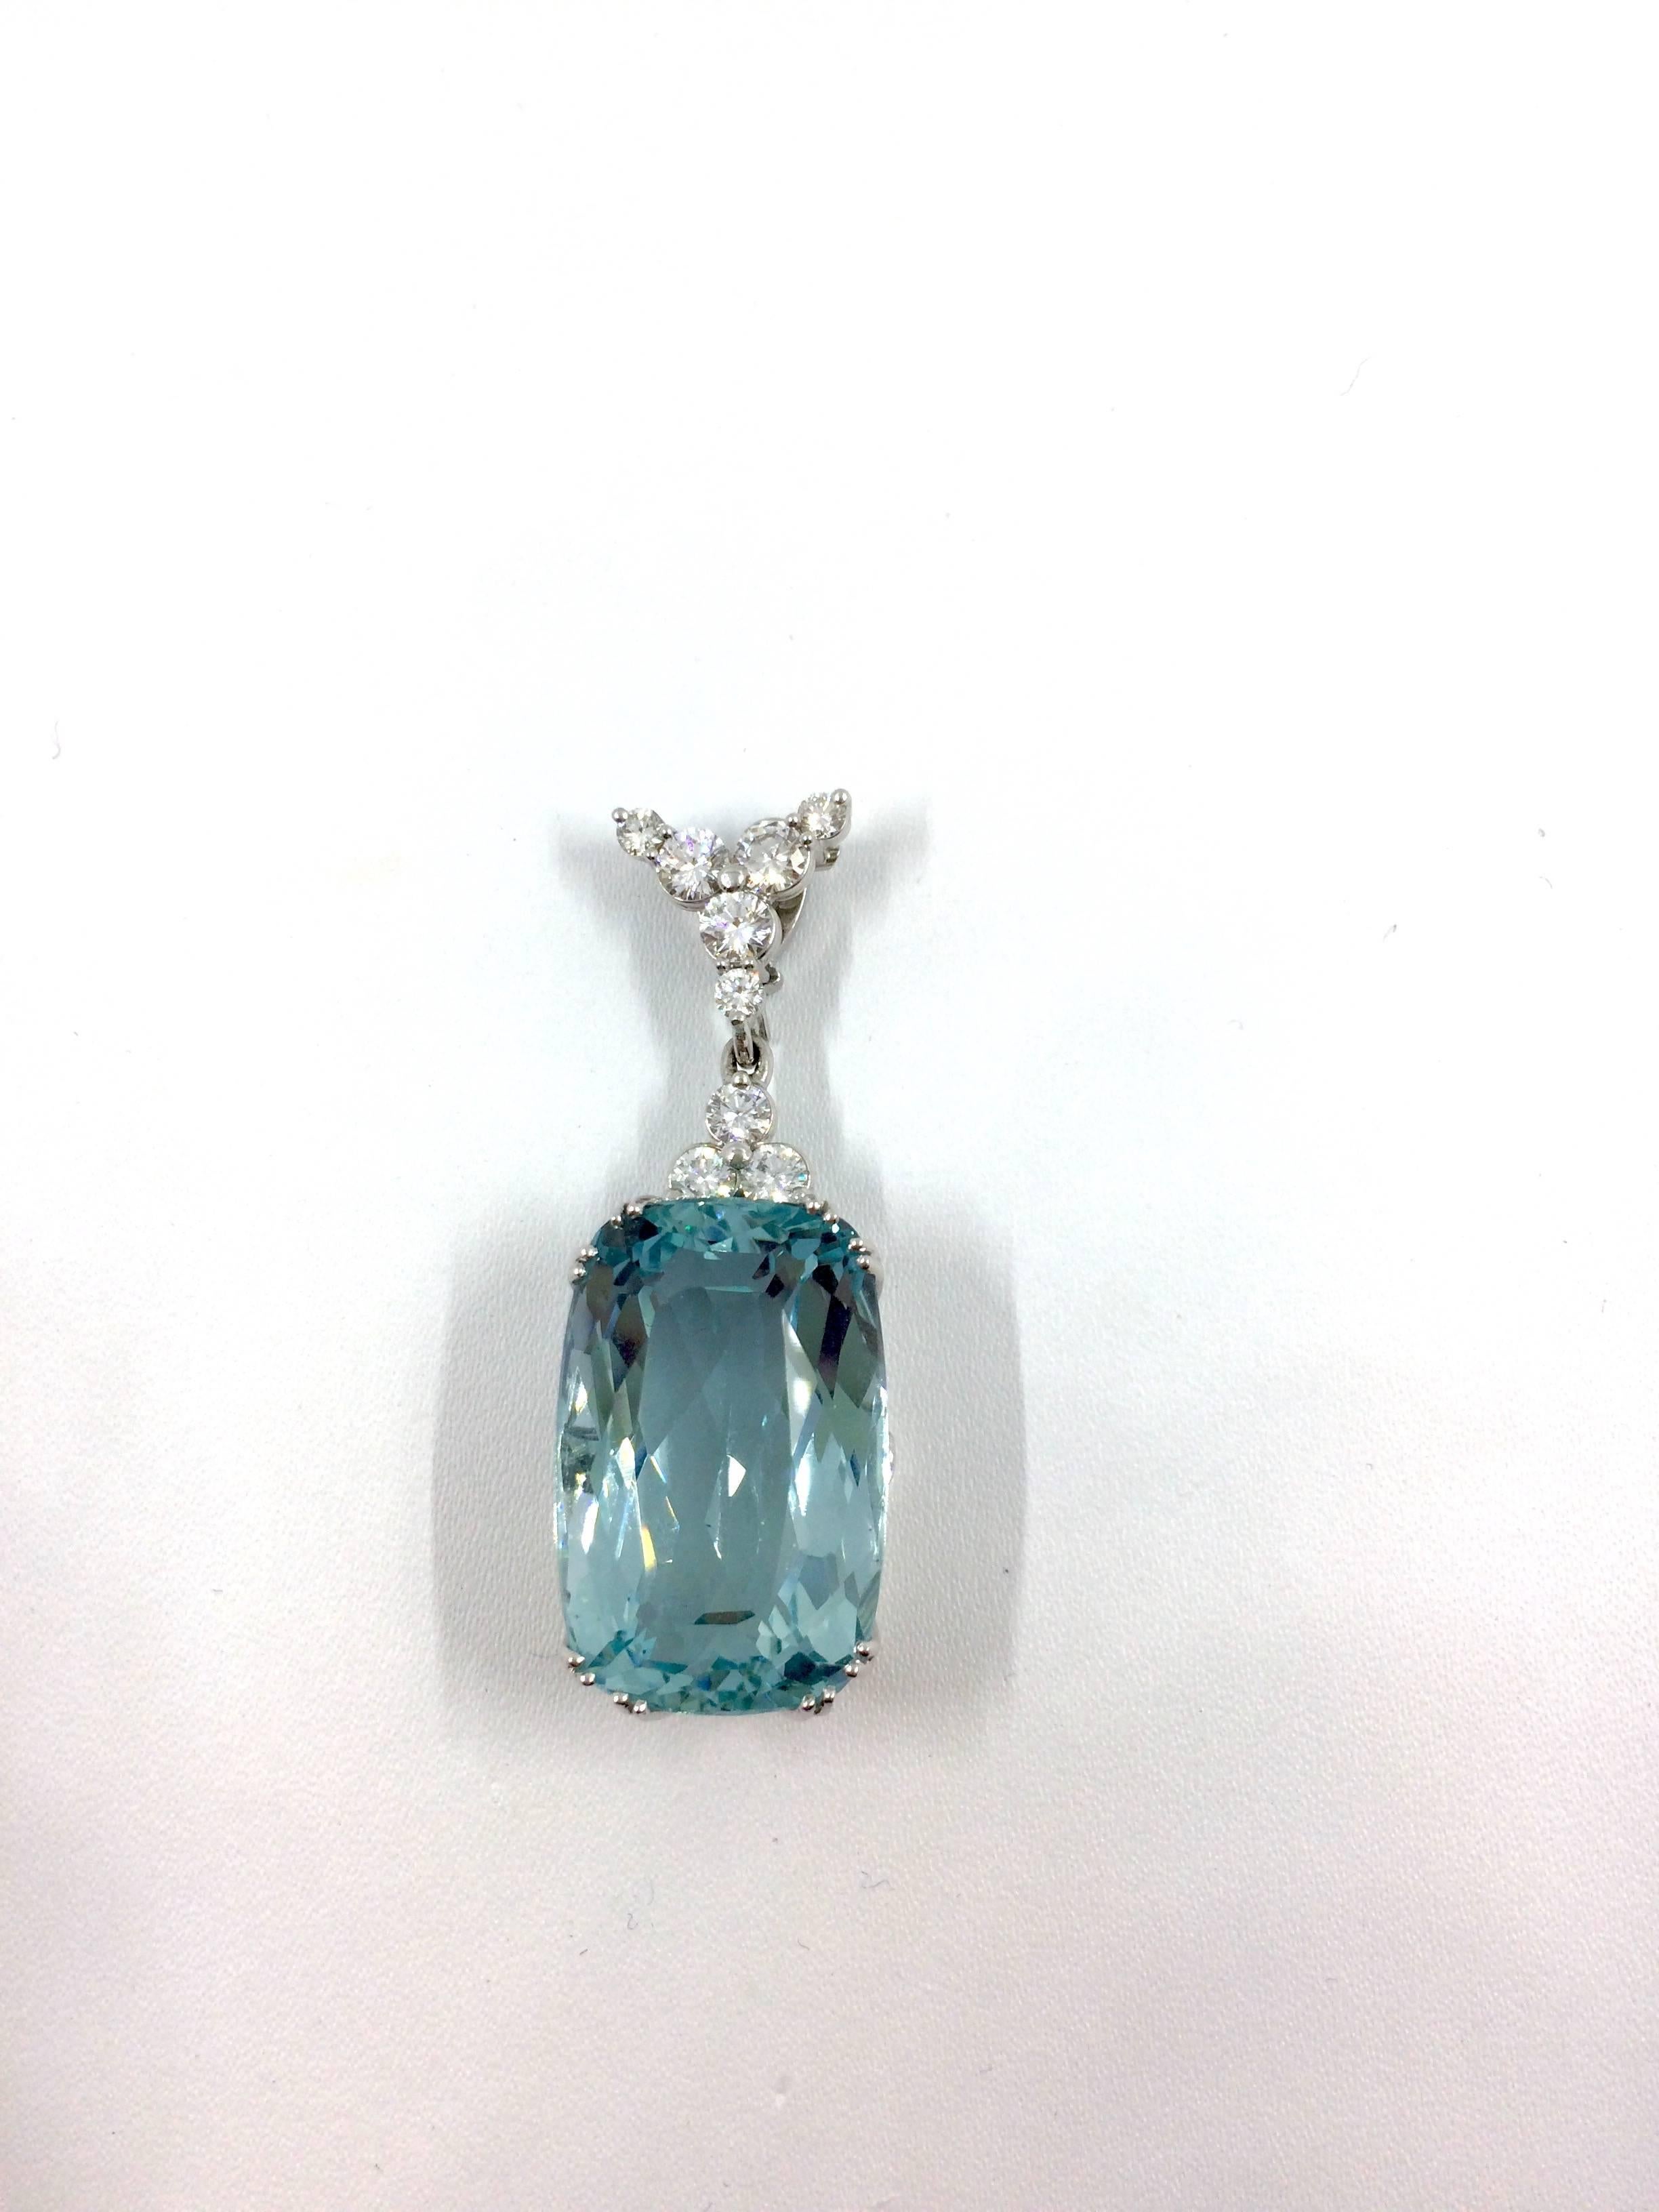 A white gold pendant set with an exceptional Aquamarine origin Santa Maria mine Brazil.
9 brilliant cut diamonds are setted above the aquamarine. The bail is open.
This pendant is a G.MINNER unique creation entirely handmade.
Total Diamonds